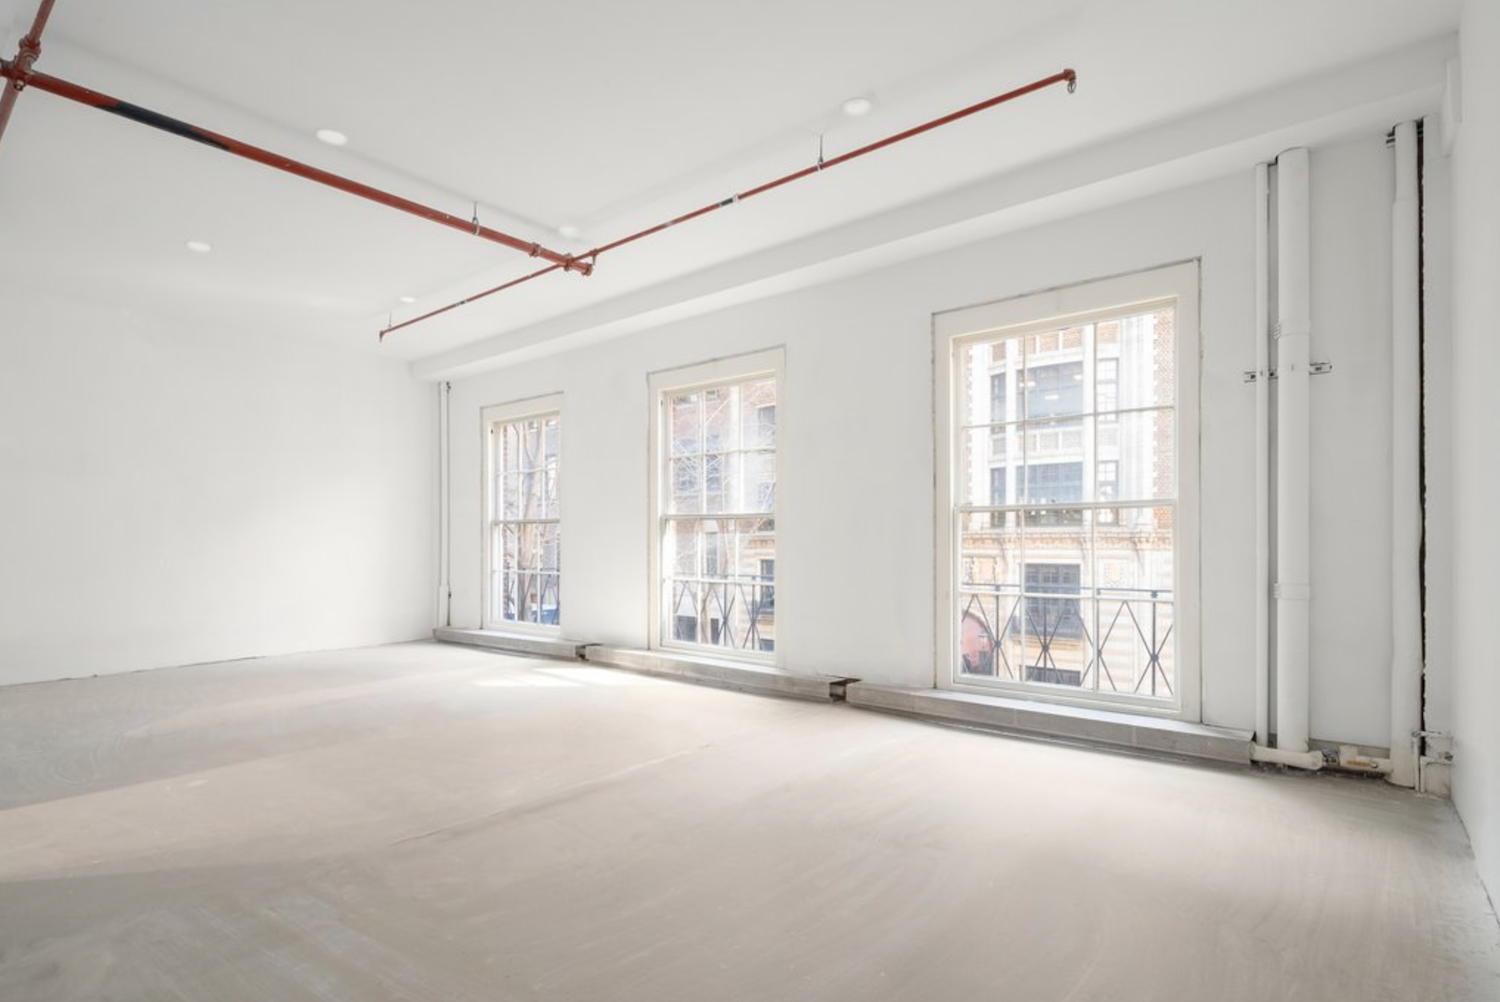 Upper East Side luxury townhouse/office for sale in New York City